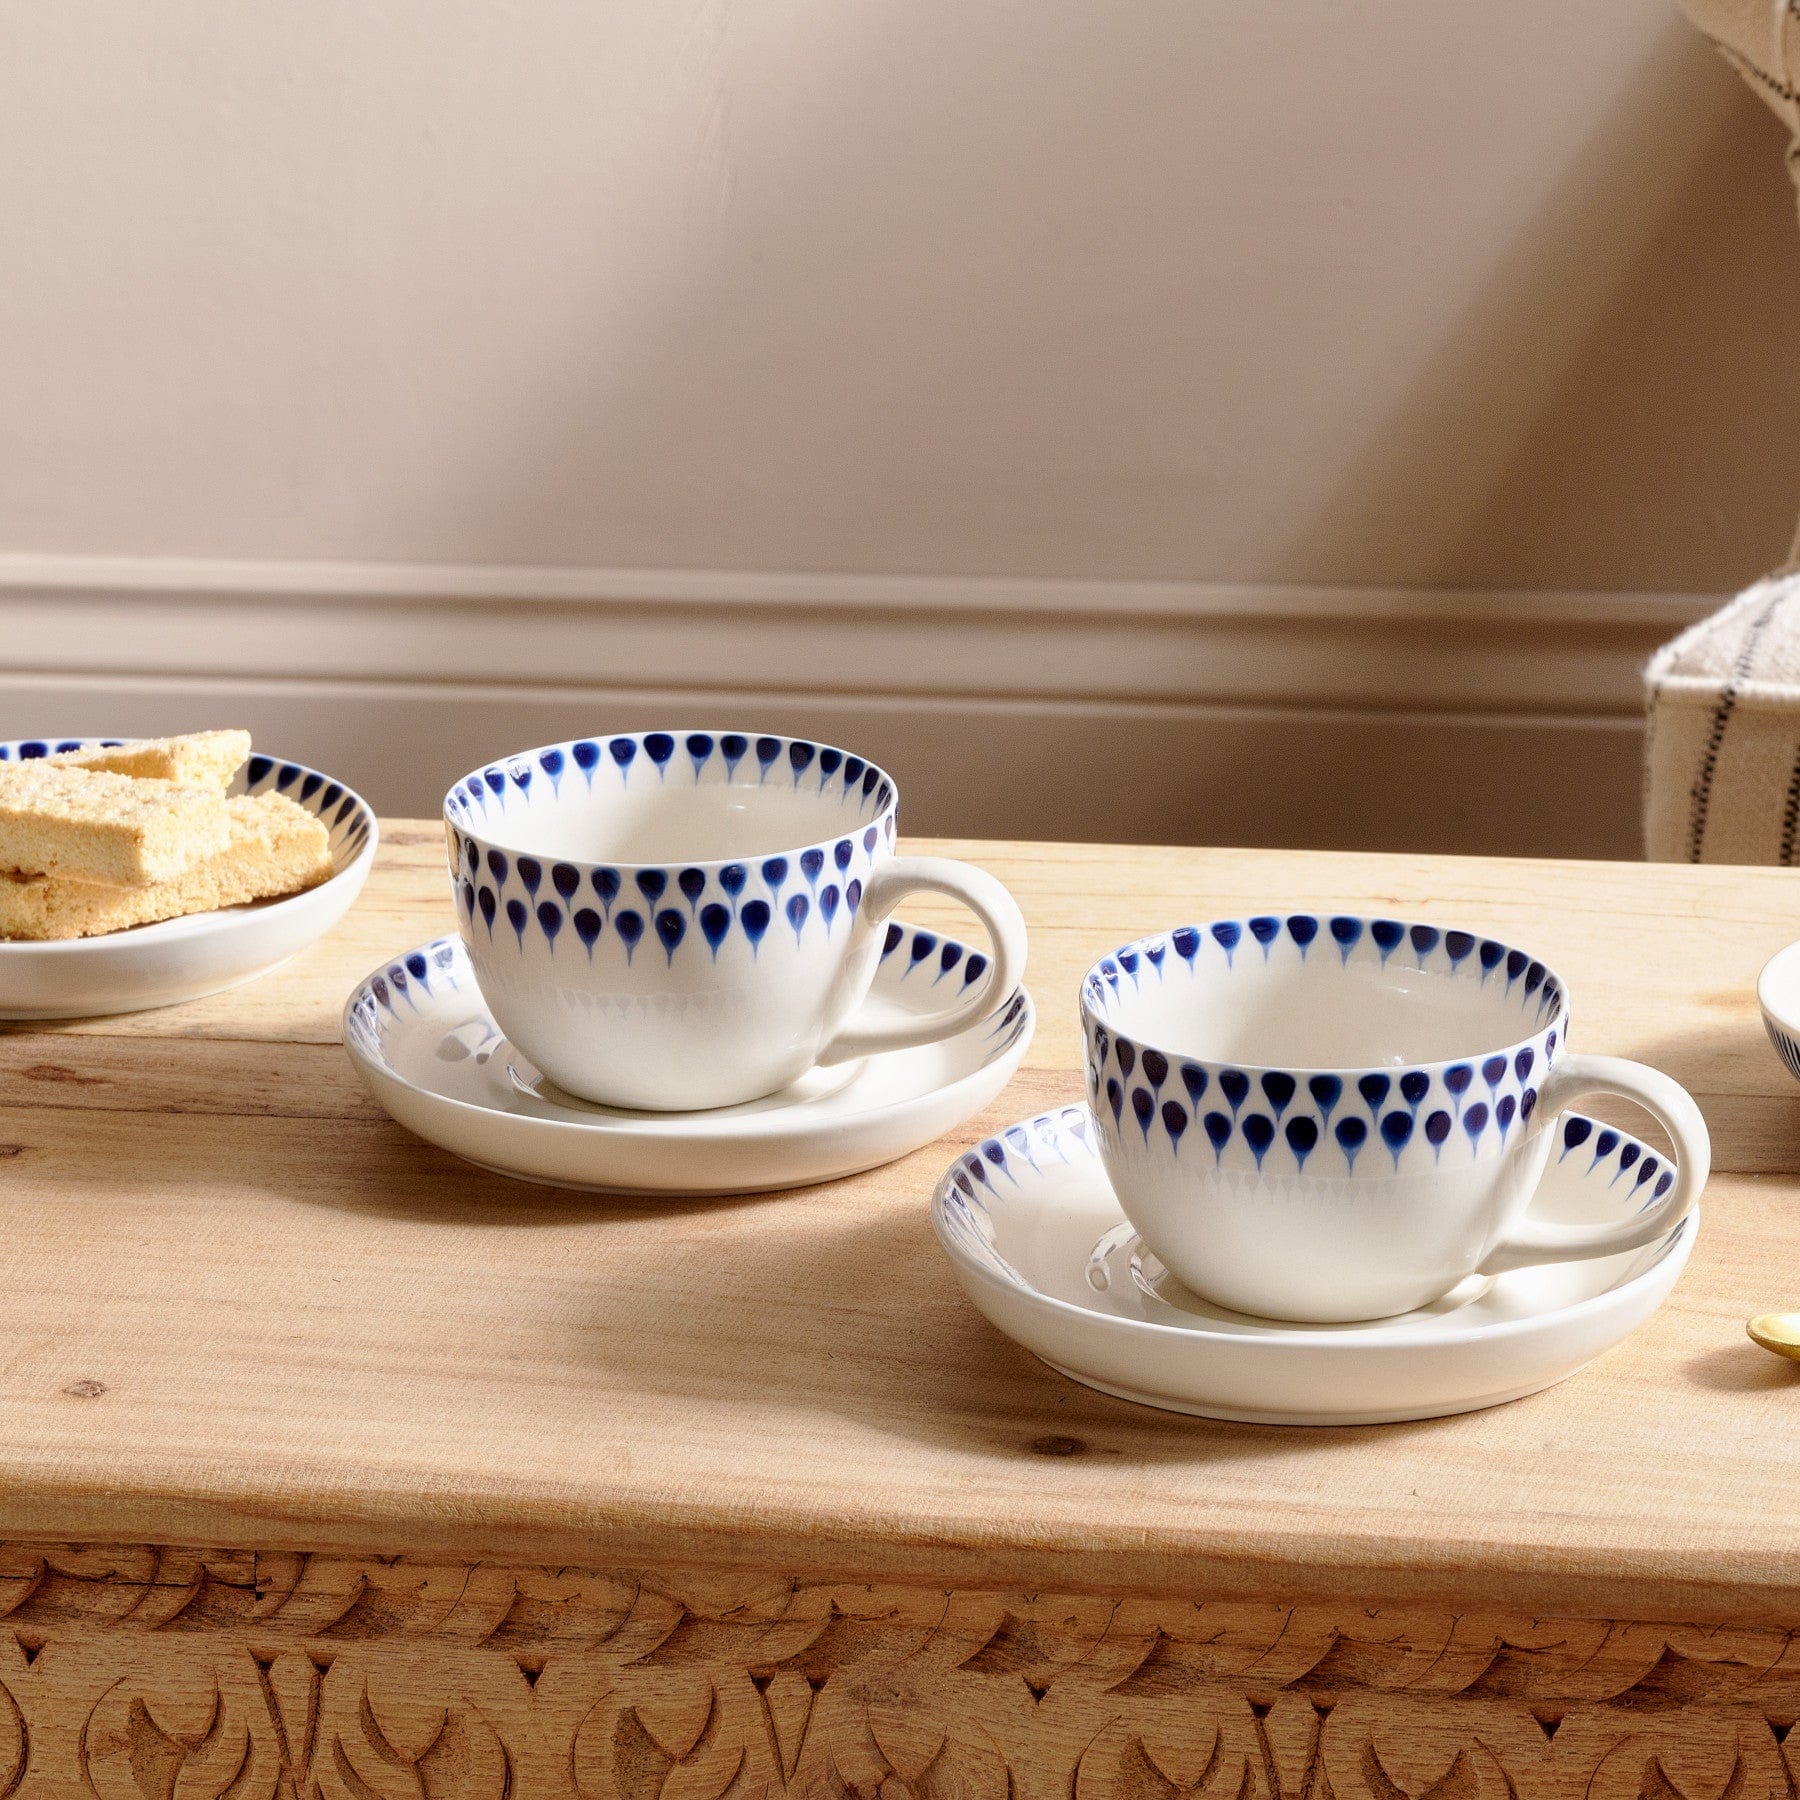 Elegant white and blue teacup sets on wooden table with matching saucers, plate of biscuits, cozy home breakfast scene.